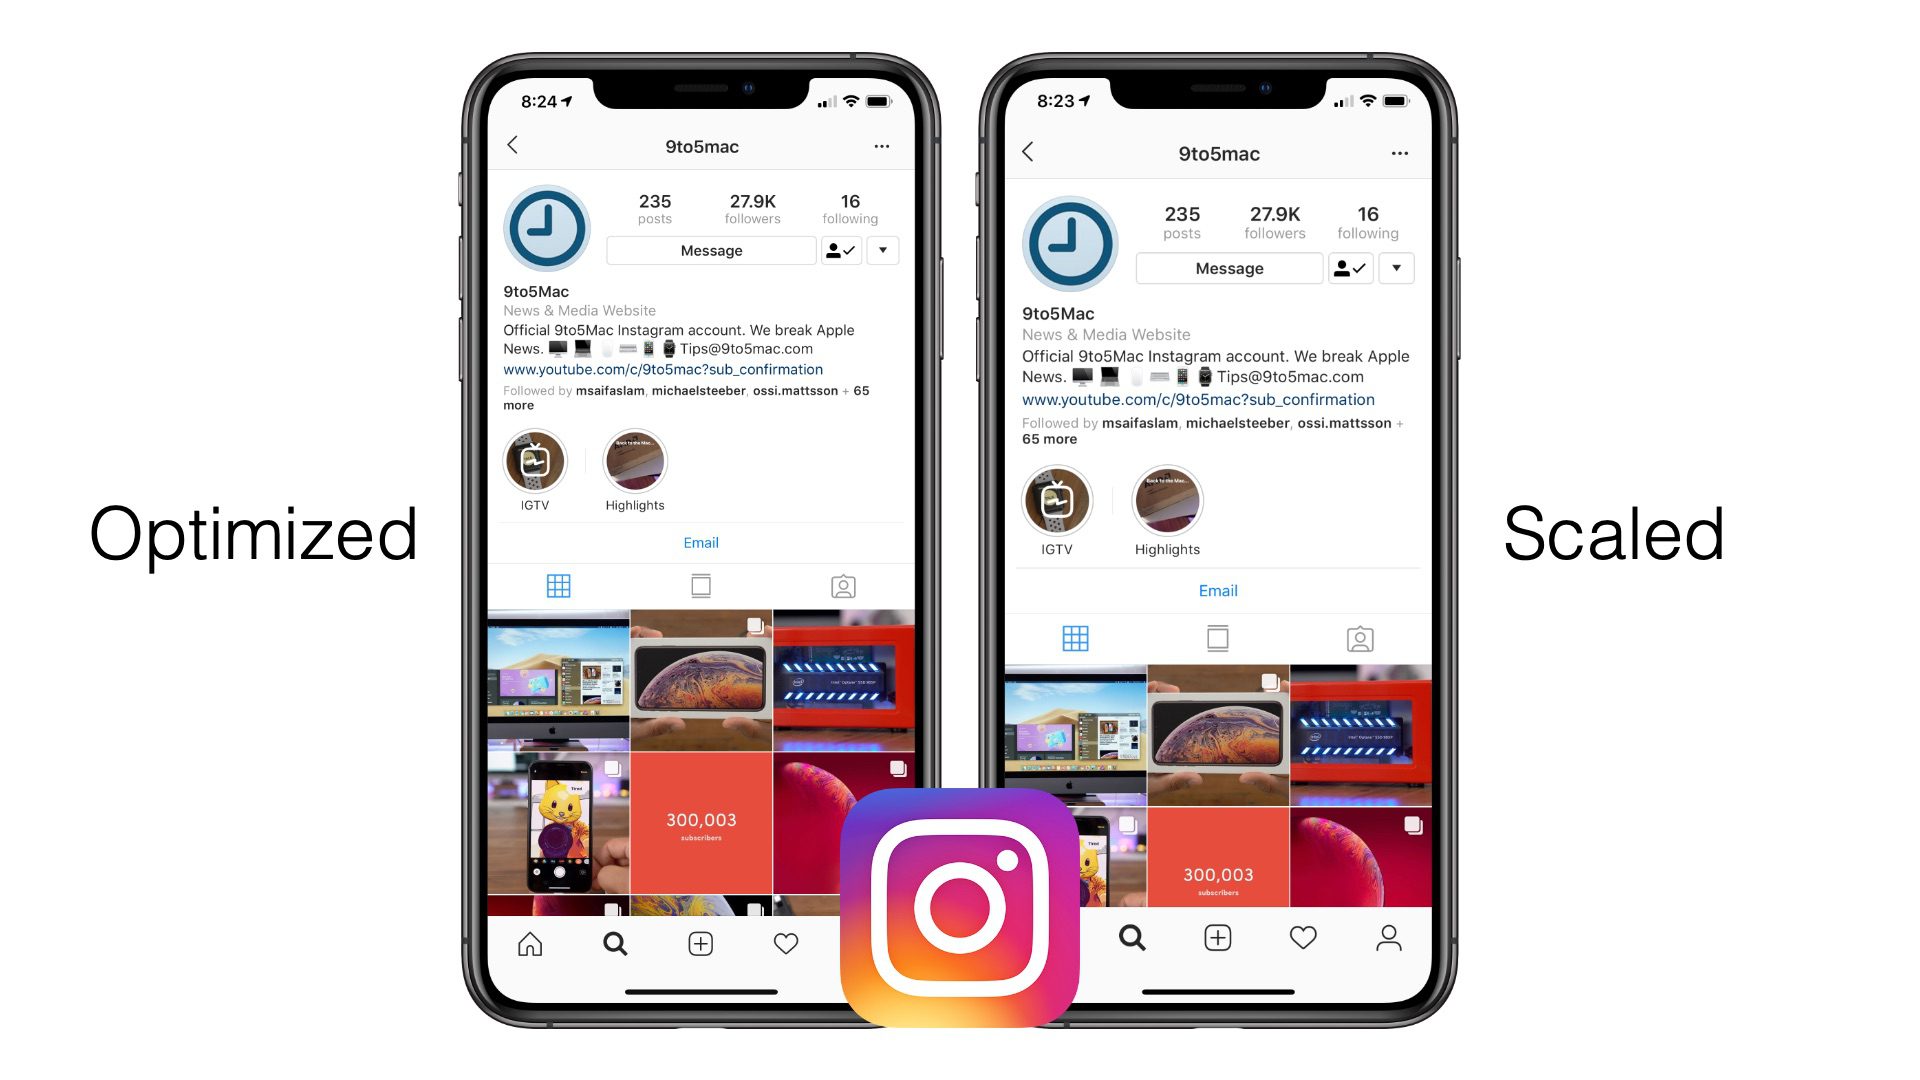 Comparison between optimized and expanded versions of Instagram on iPhone XS Max